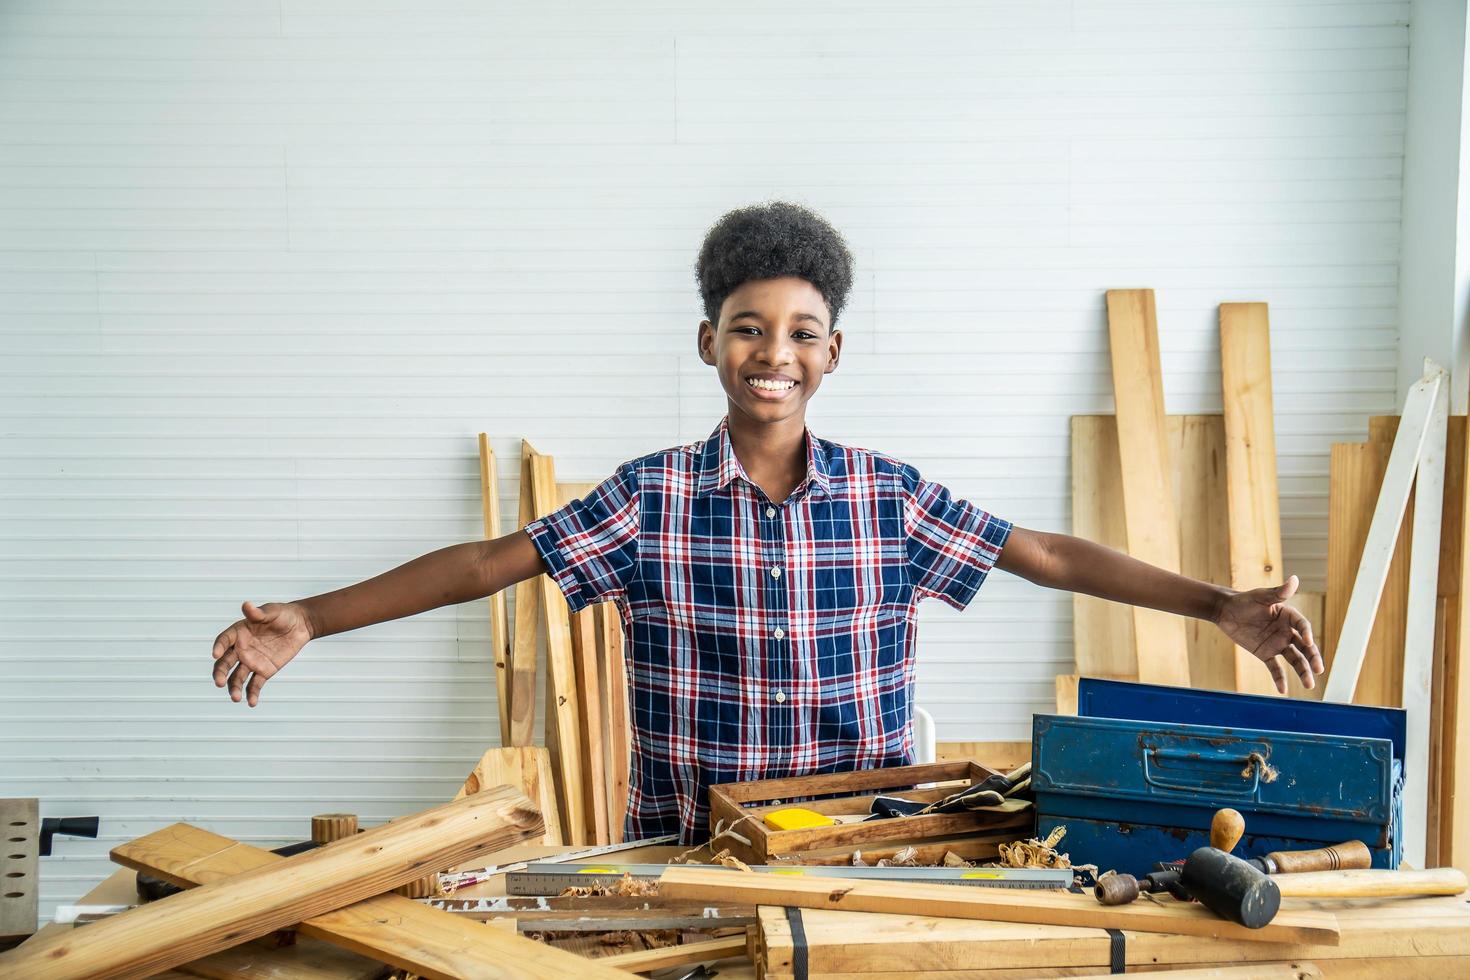 Smiling African-American boy carpenter spreading arms happily to show that the woodwork is placed on the table will try to succeed photo